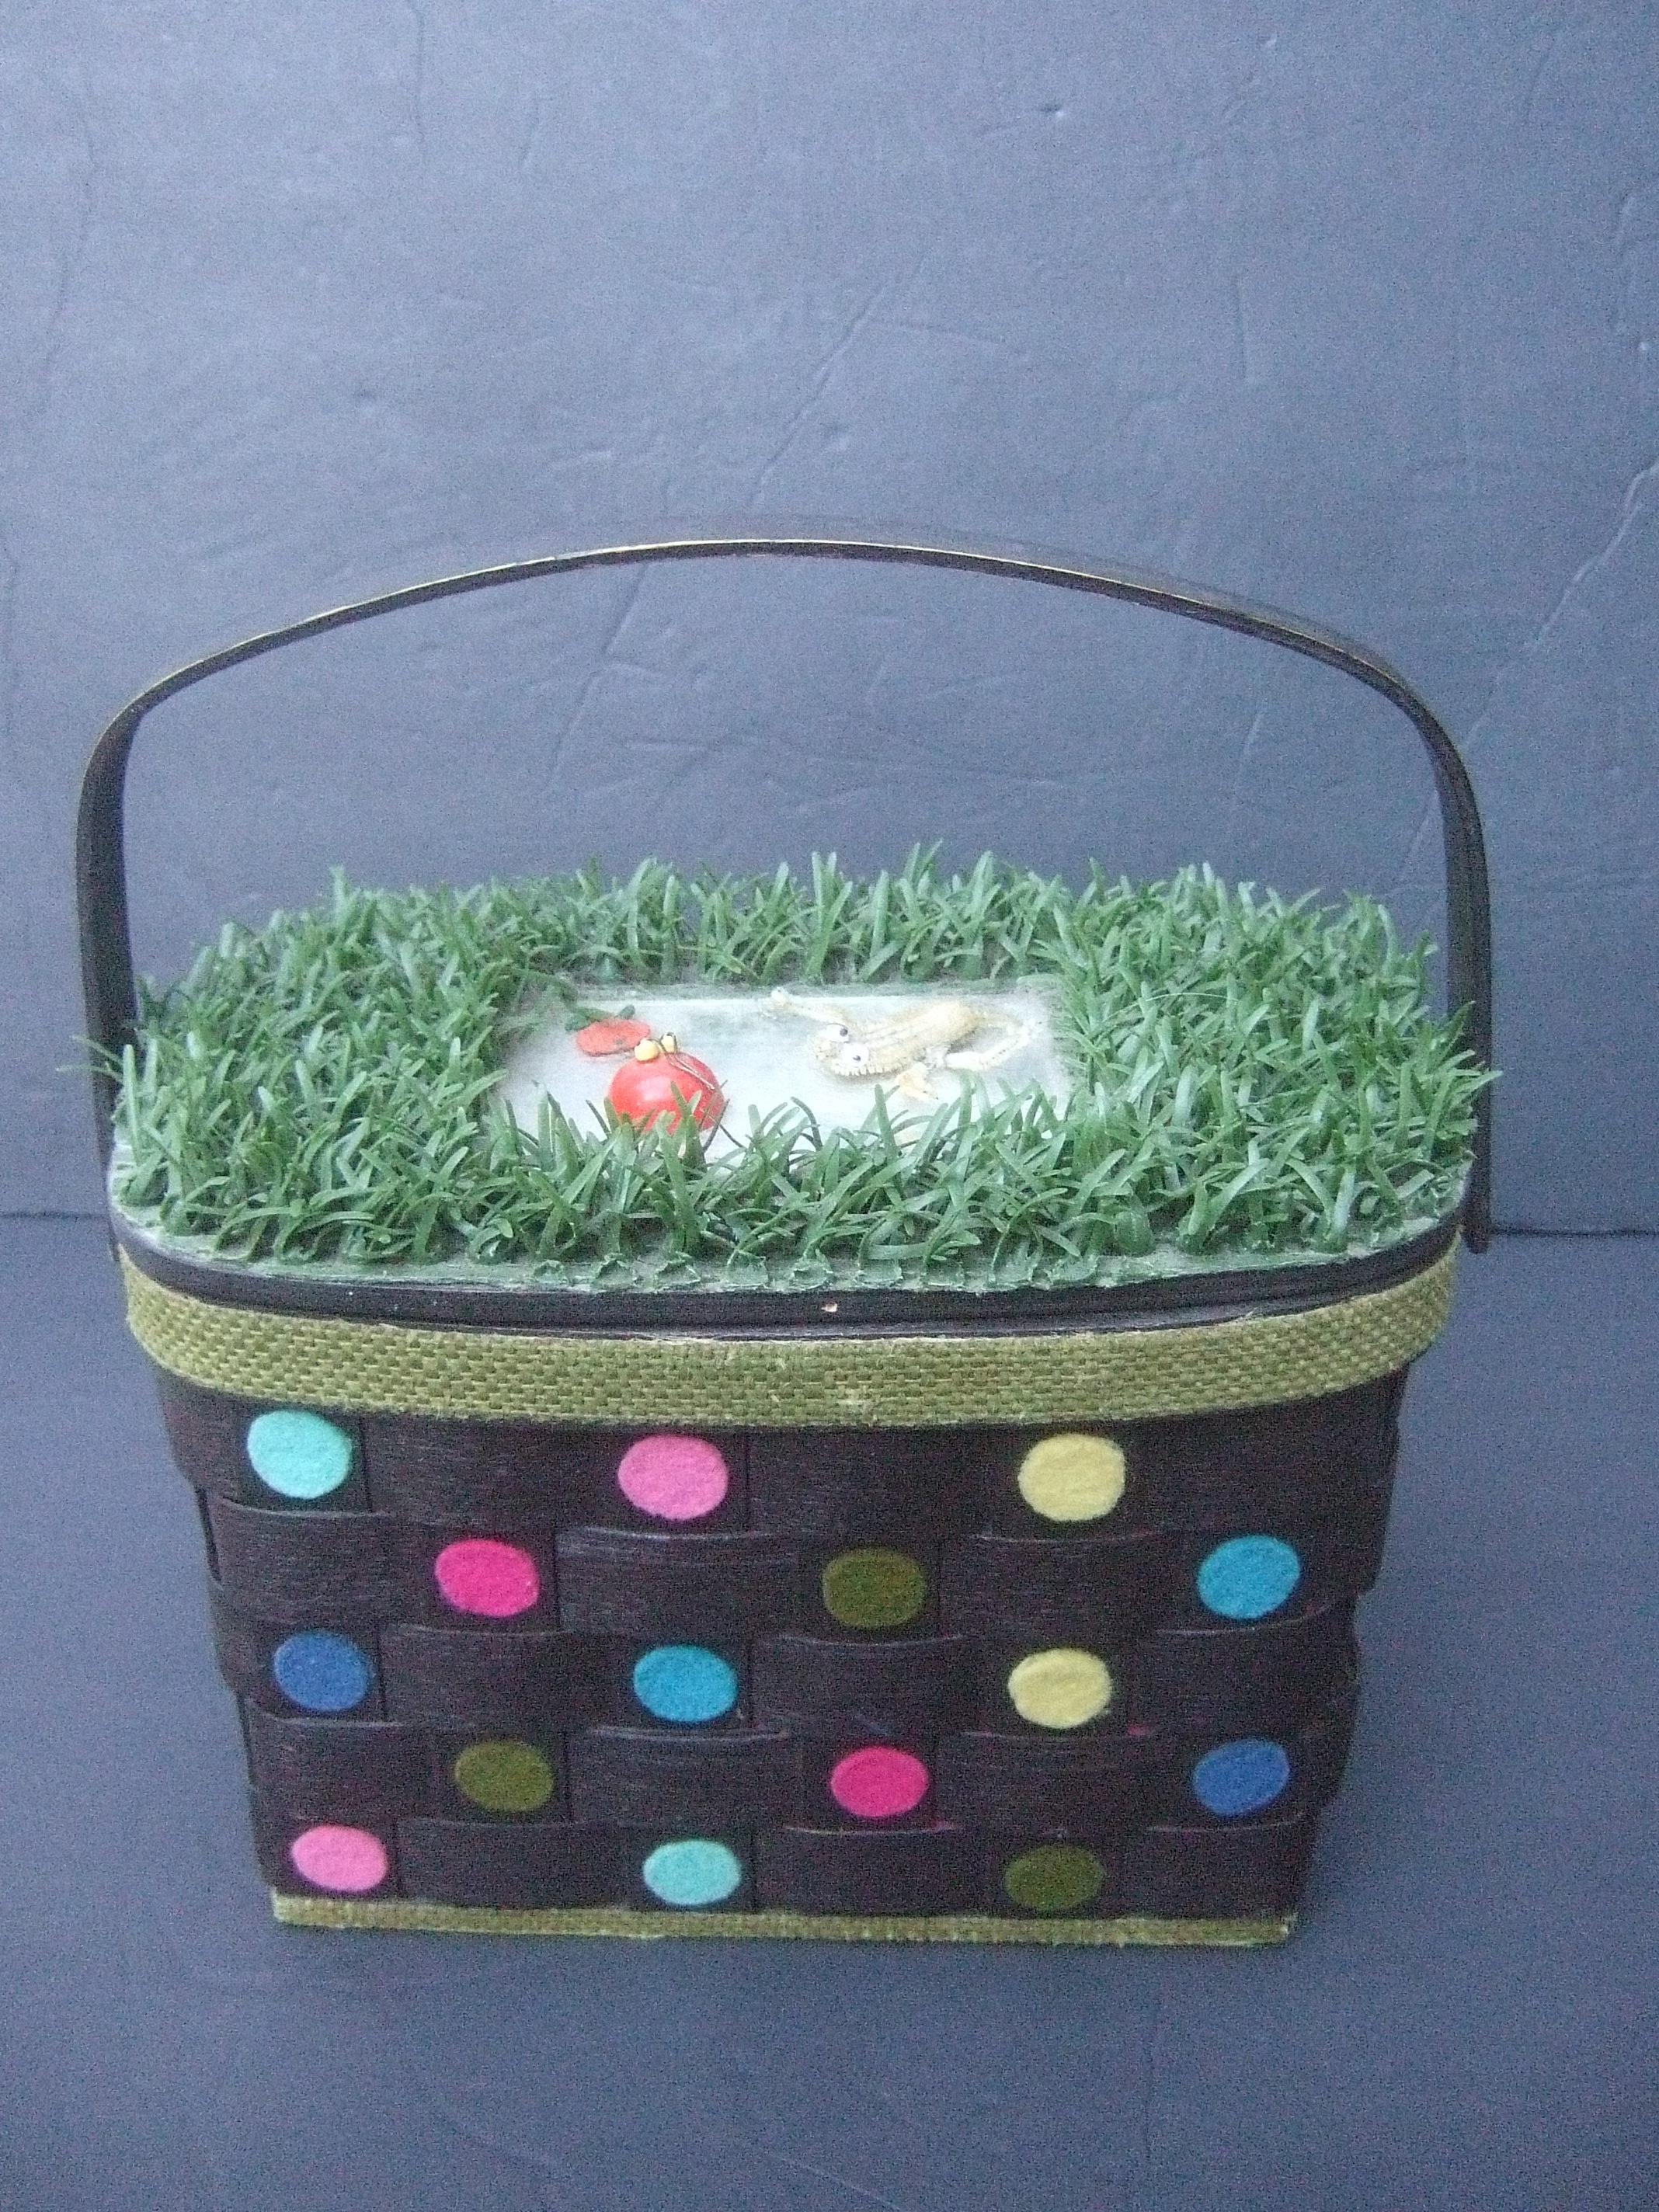 Whimsical Quirky Astro Turf  Wicker Handmade Basket Purse circa 1970 For Sale 4